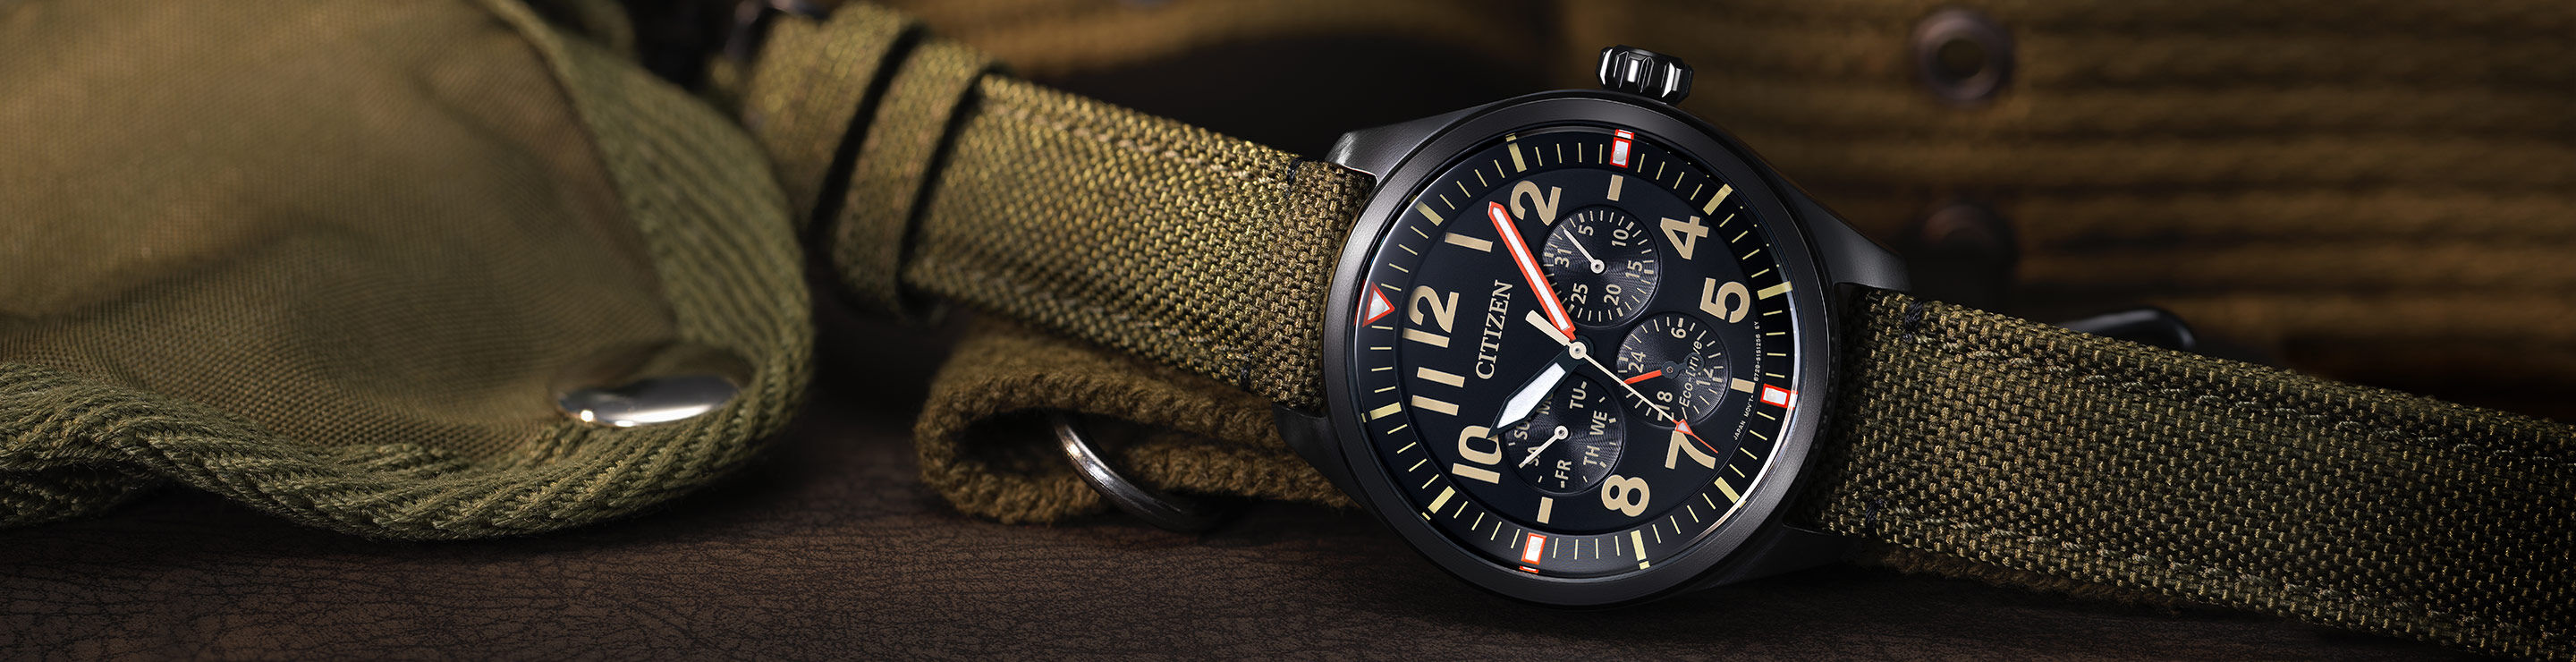 Men's Military Watches - Military Style Watches | CITIZEN